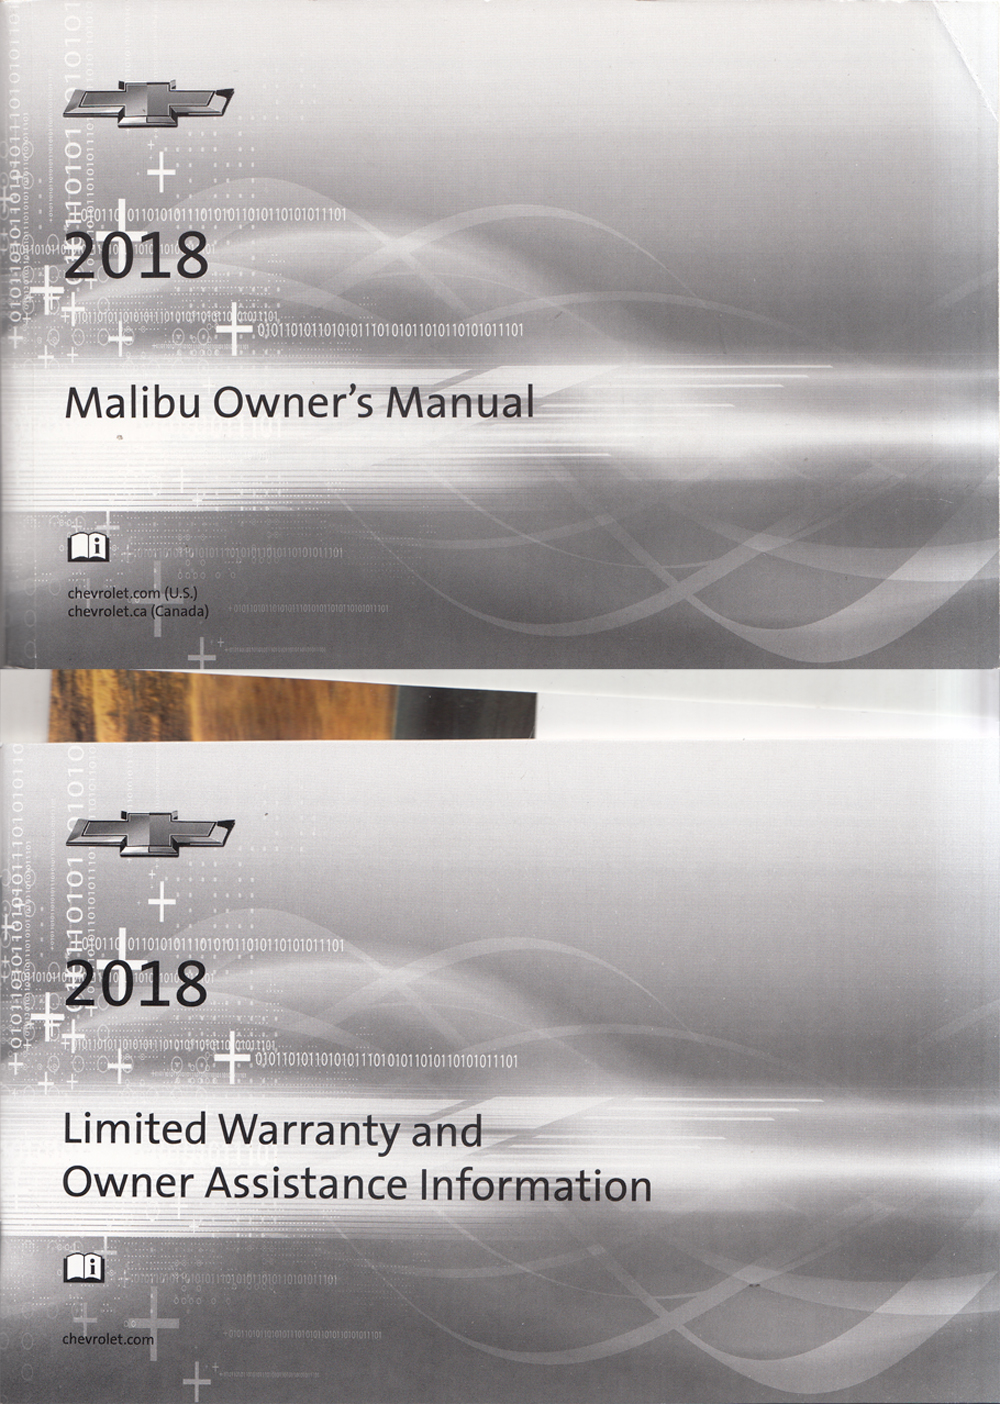 2018 Chevrolet Malibu Owners Manual with Pamphlets Original